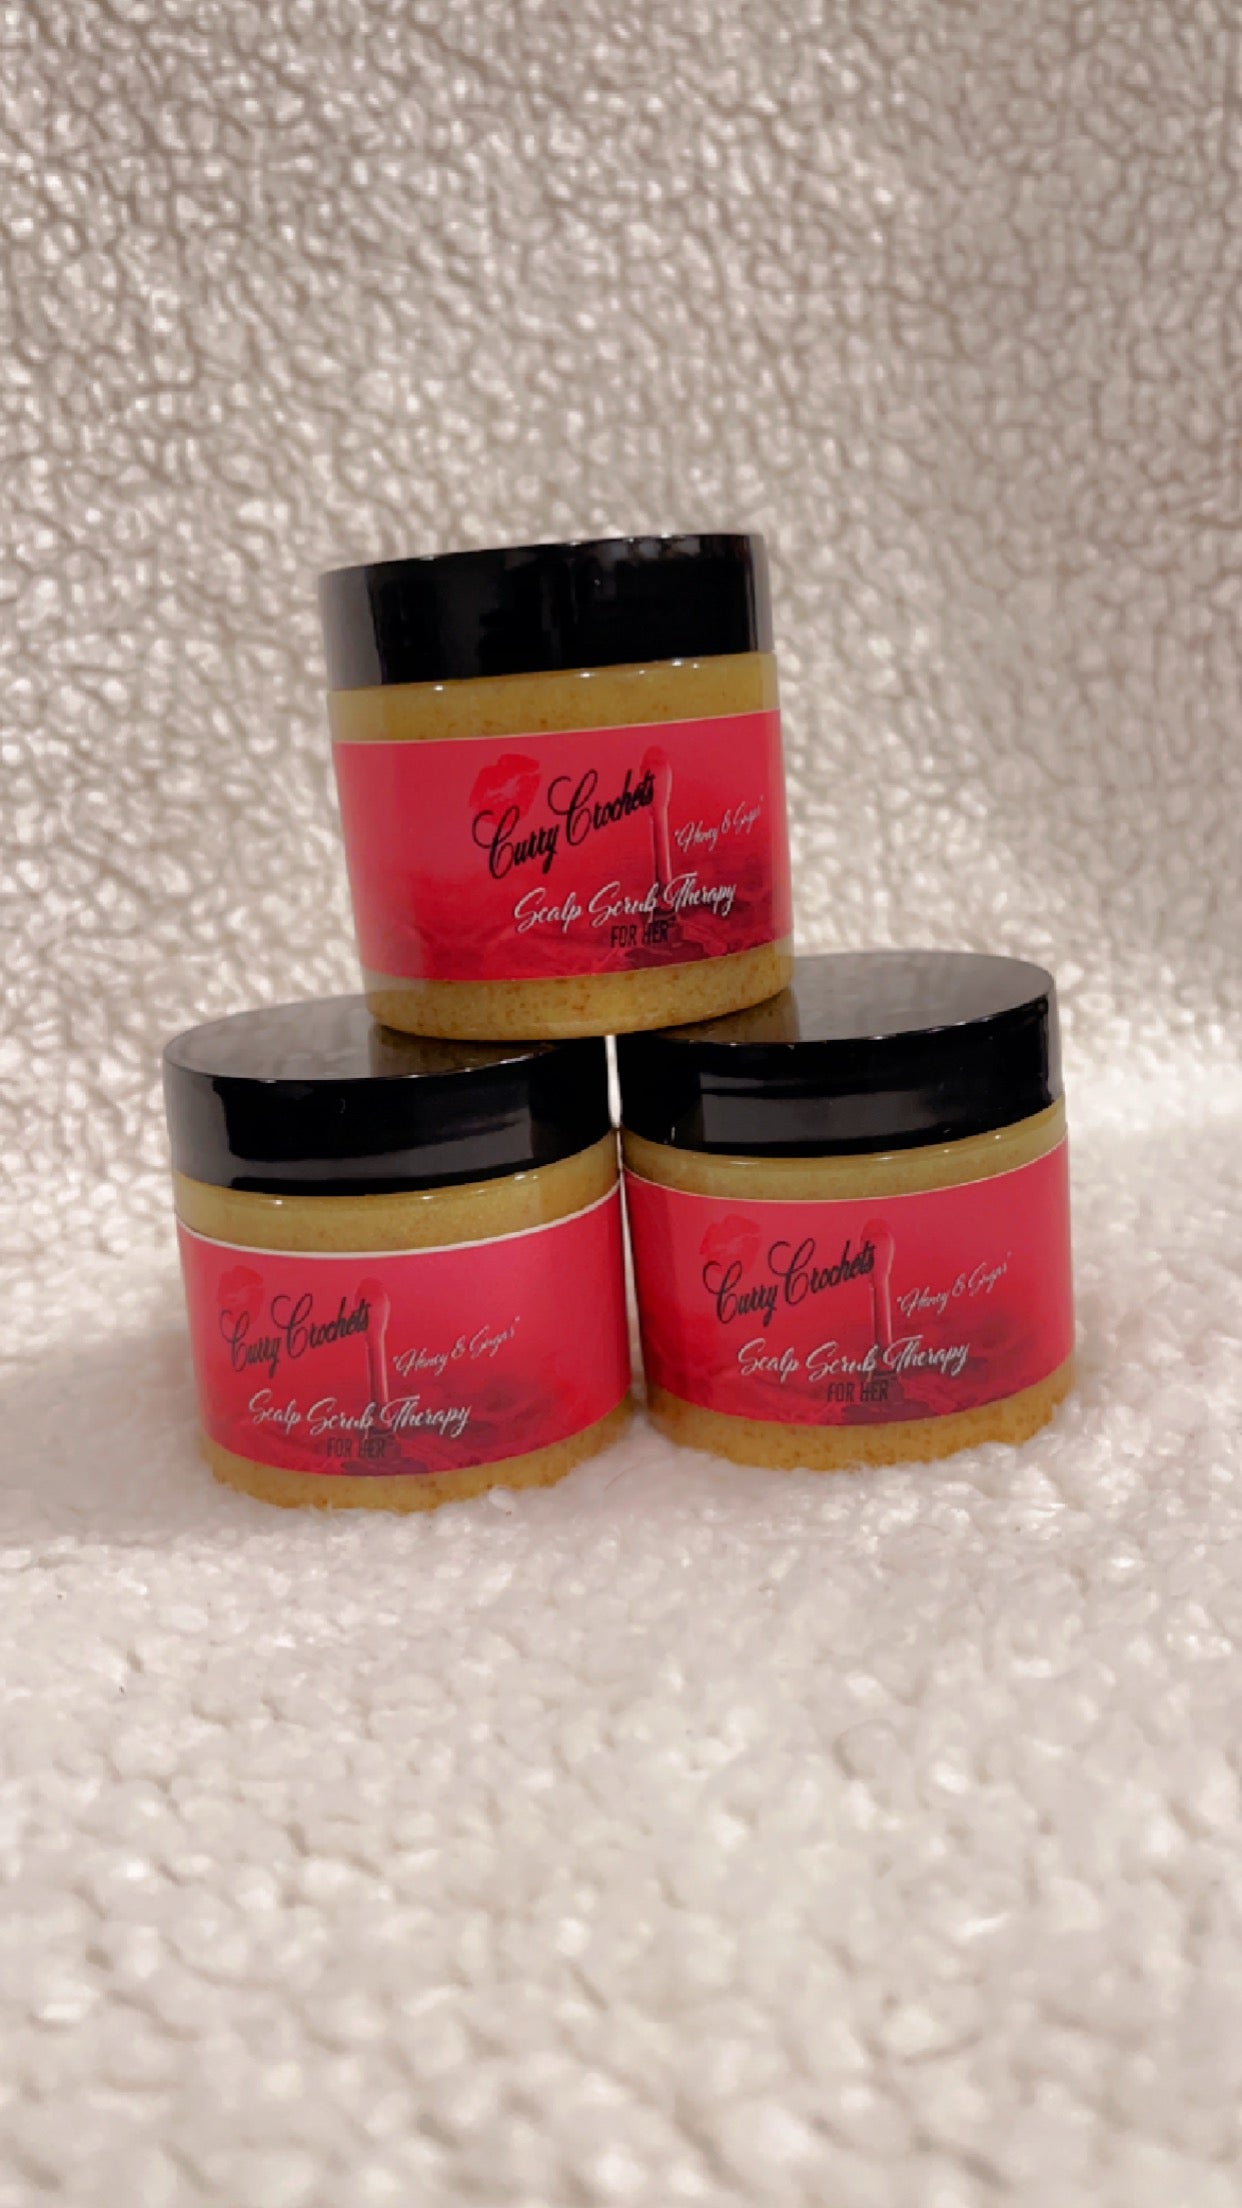 Soothing Honey and sugar: Scalp scrub therapy for dandruff